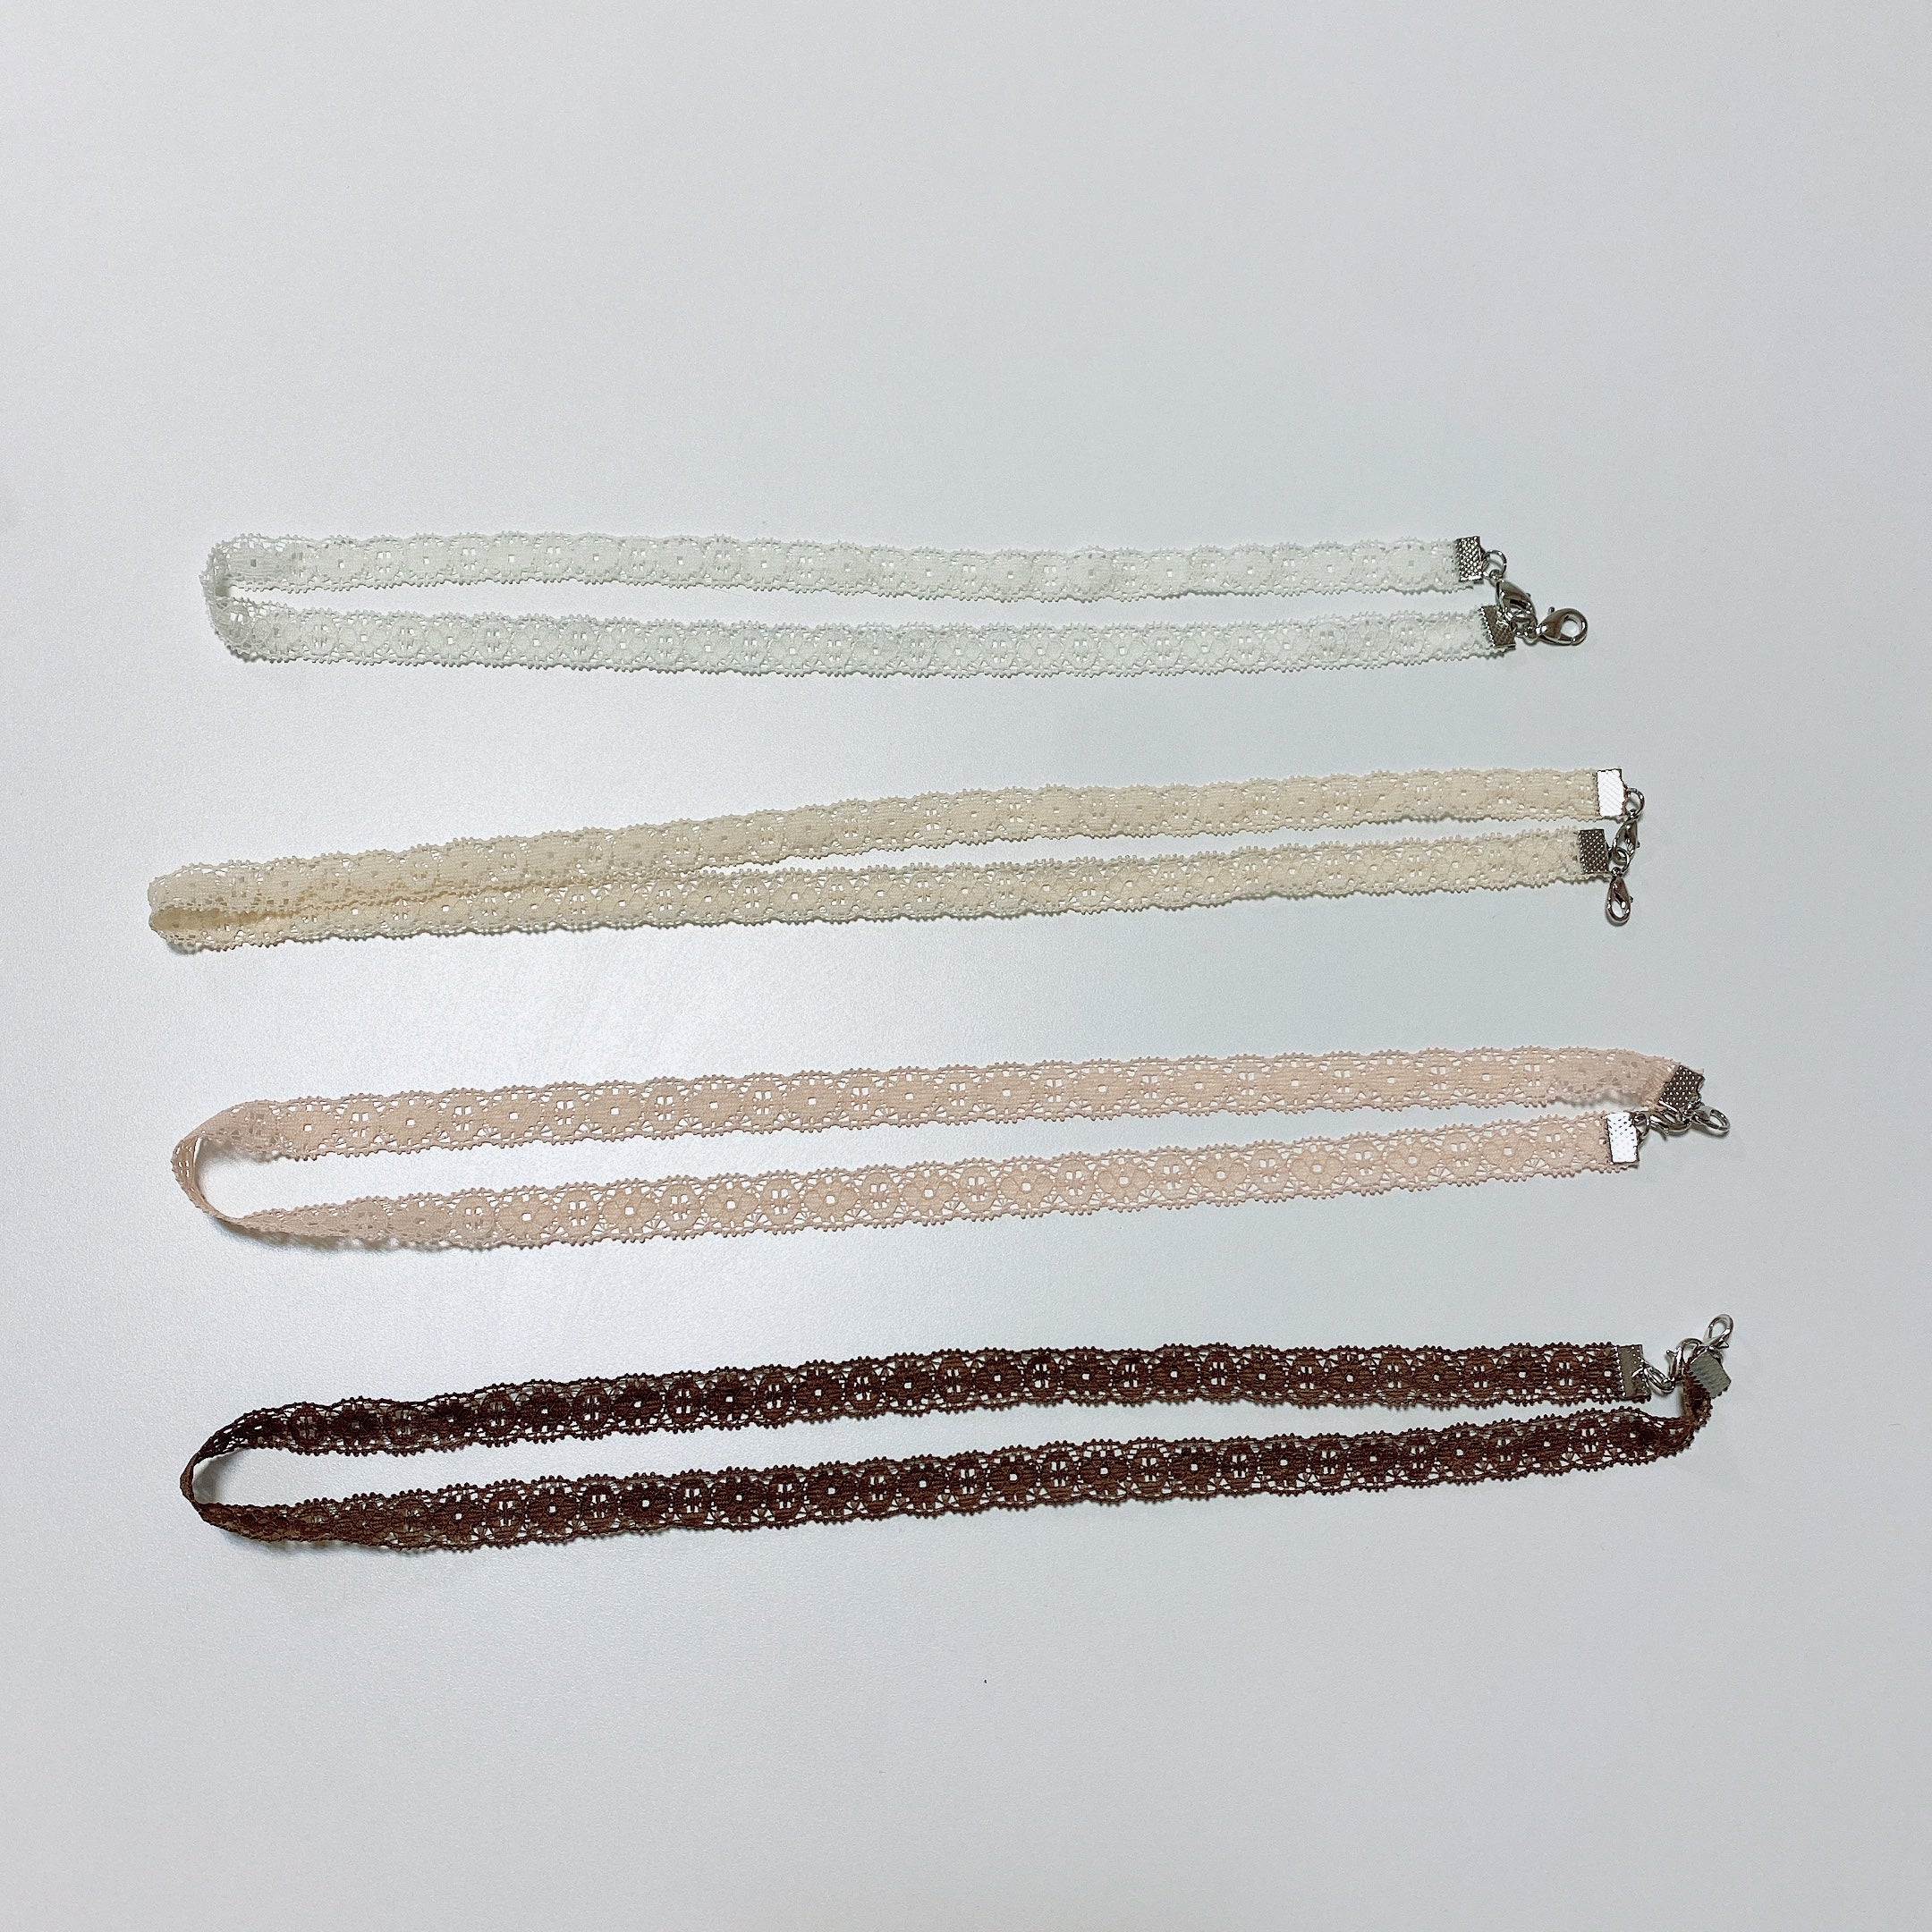 Lace Mask Strap -New Colors